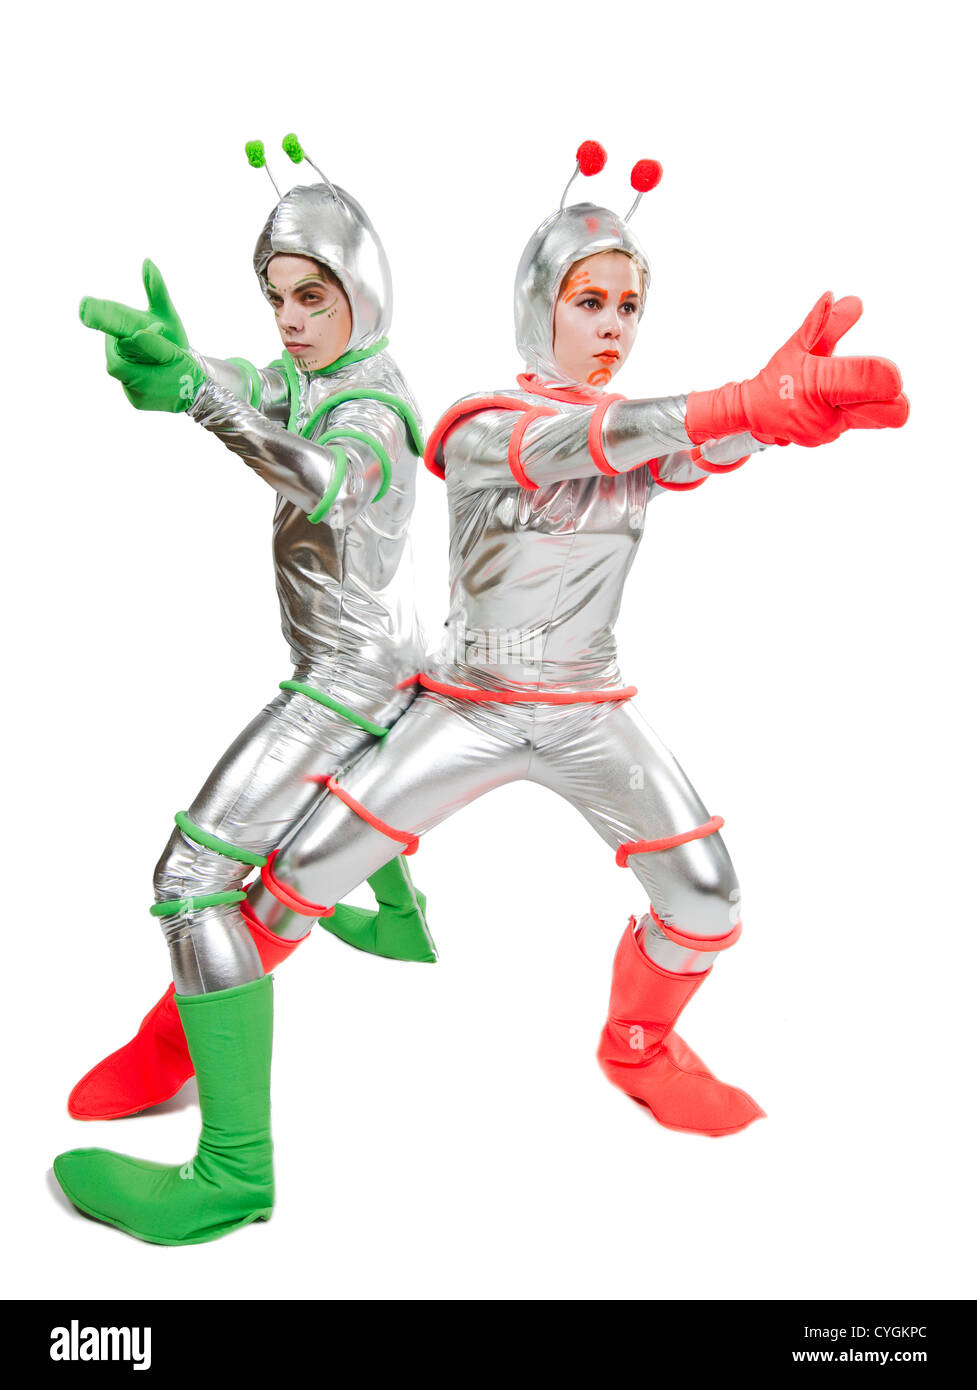 Extraterrestrial being. Aliens. Two Persons wearing costume of funny alien Stock Photo